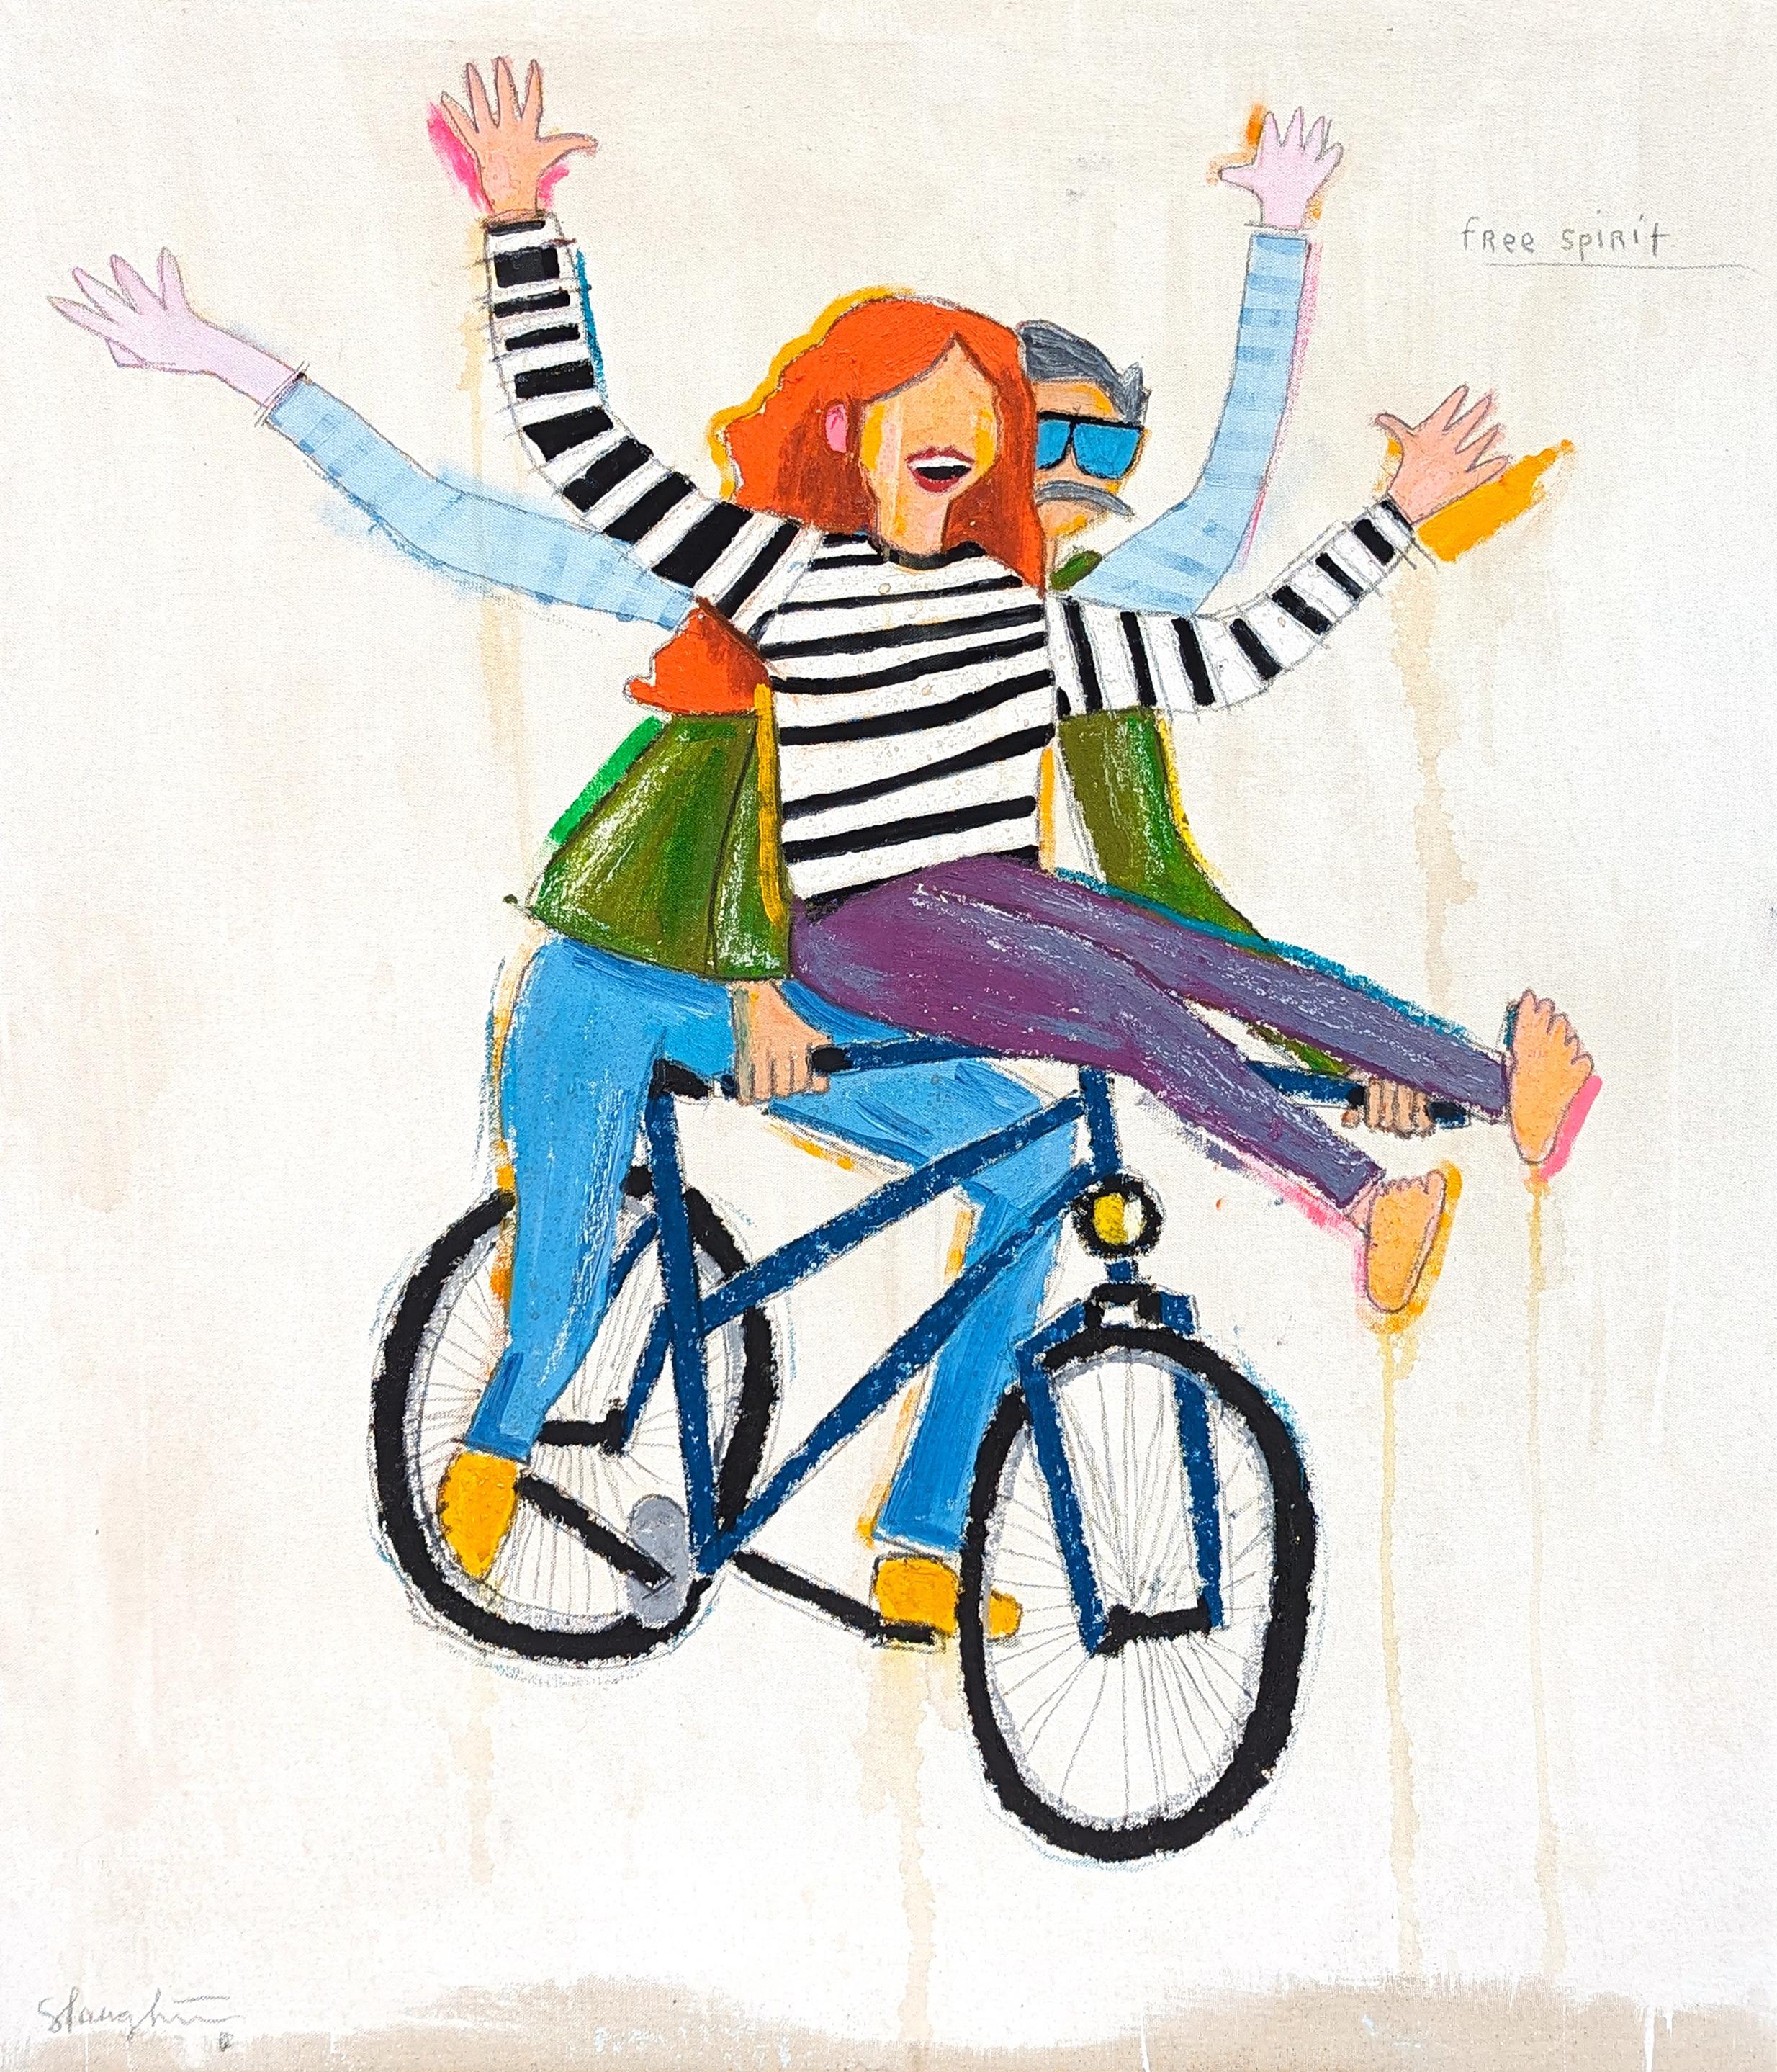 Tra' Slaughter Figurative Painting - “Free Spirit” Abstract Contemporary Colorful Figurative Bicycling Painting